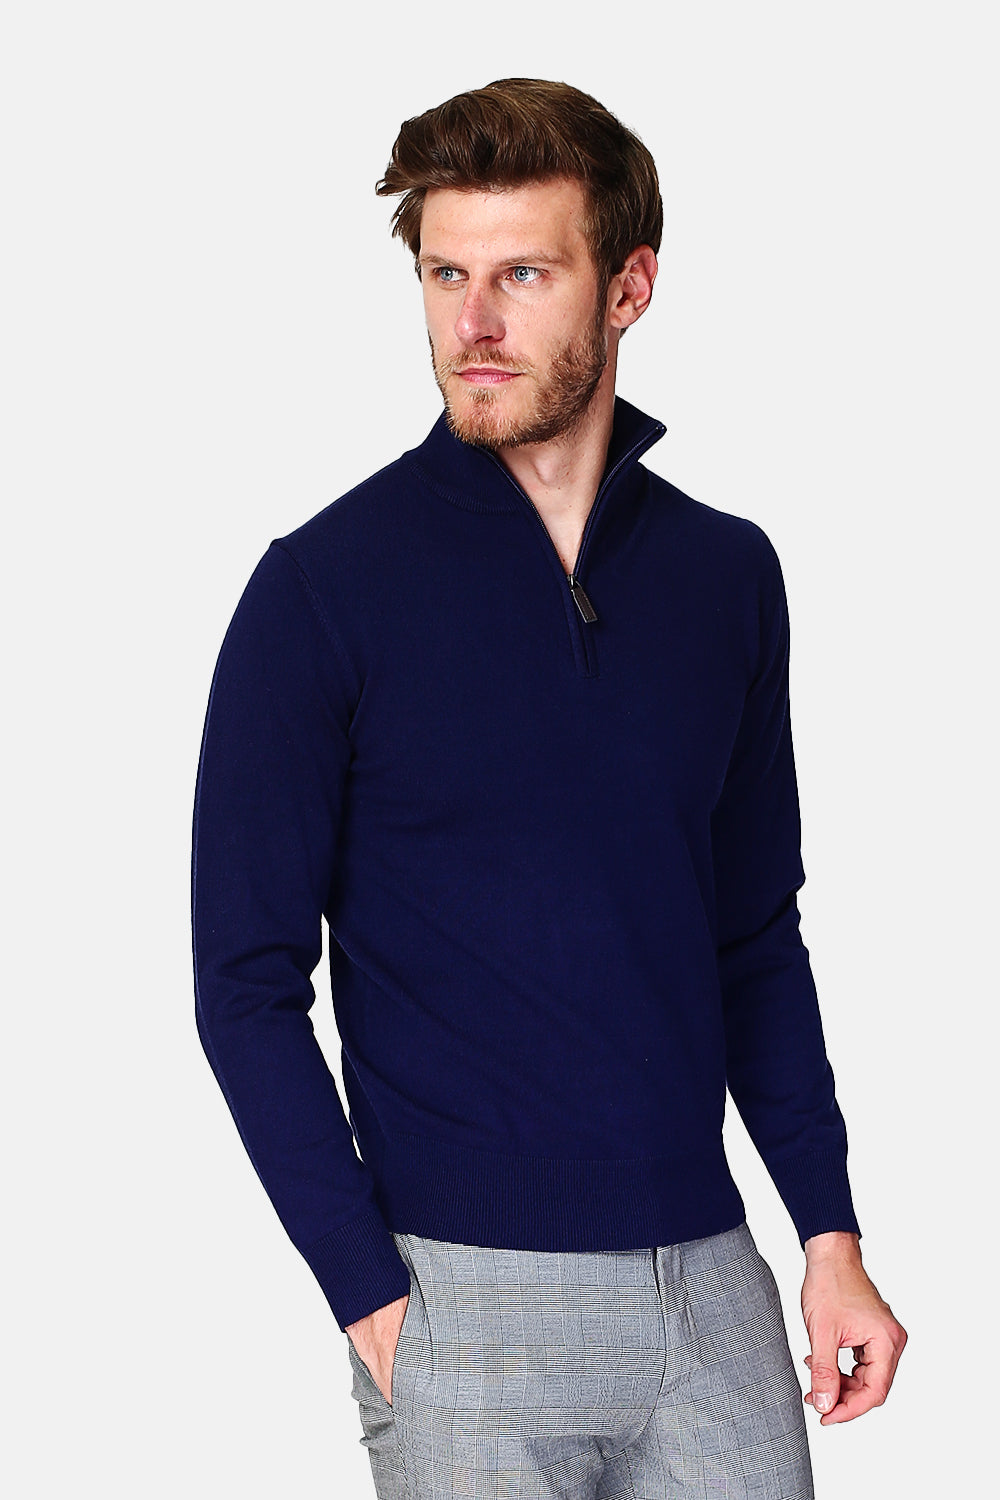 Zipped trucker neck sweater with long sleeves knitting in 3 threads